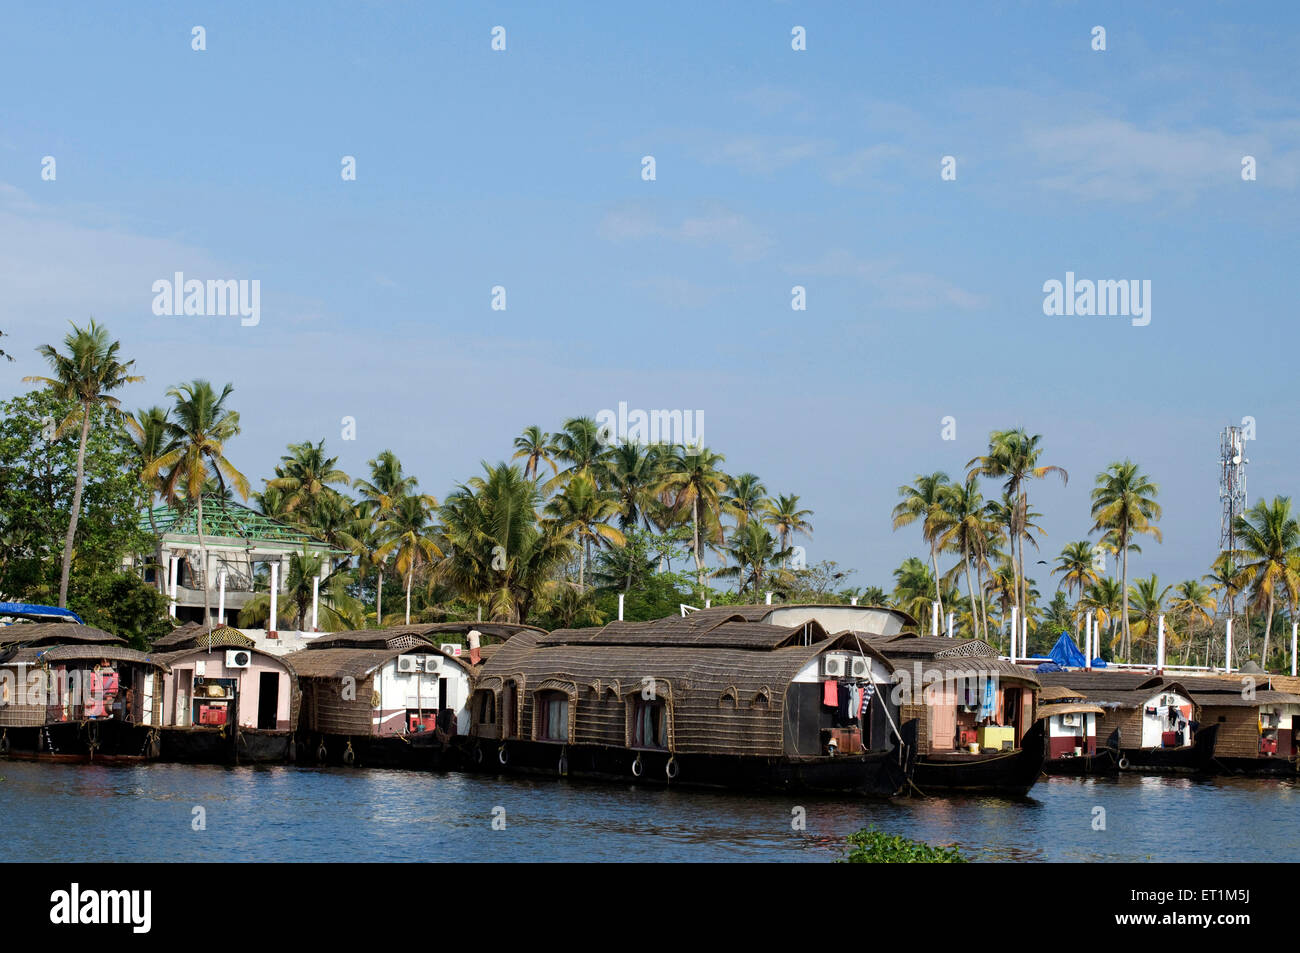 Several house boats parked in the backwaters of Alleppey Kerala India Asia Stock Photo